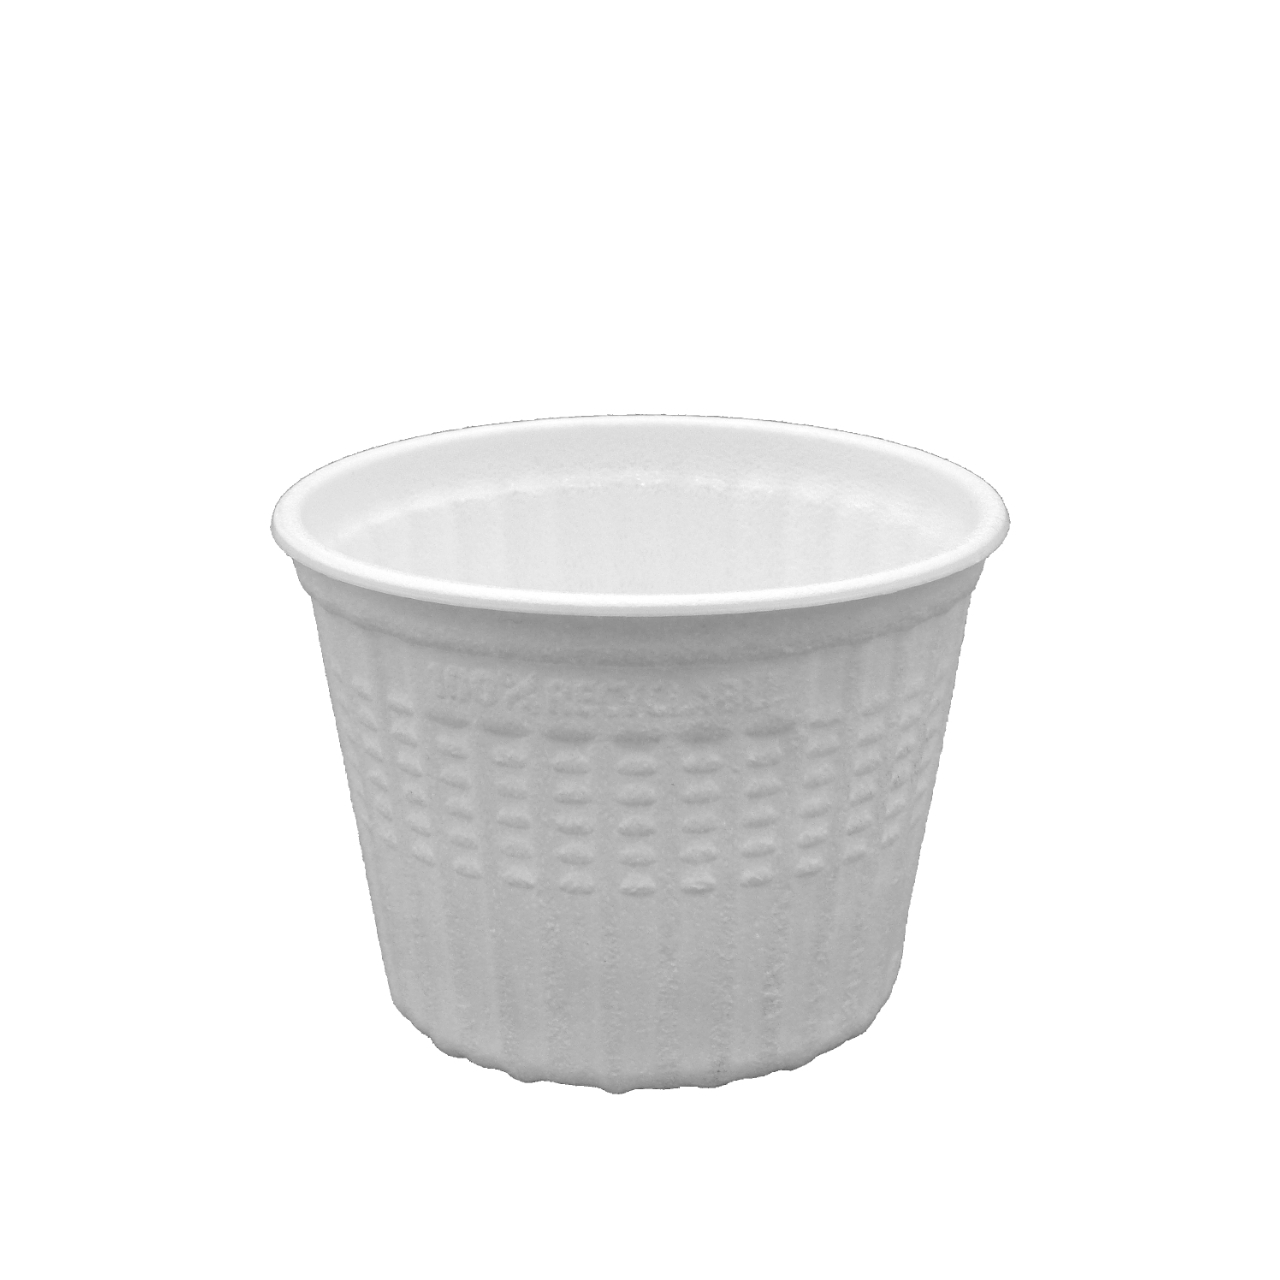 Suppen-Foodcontainer 500 ml, PP-weiß, Thermo